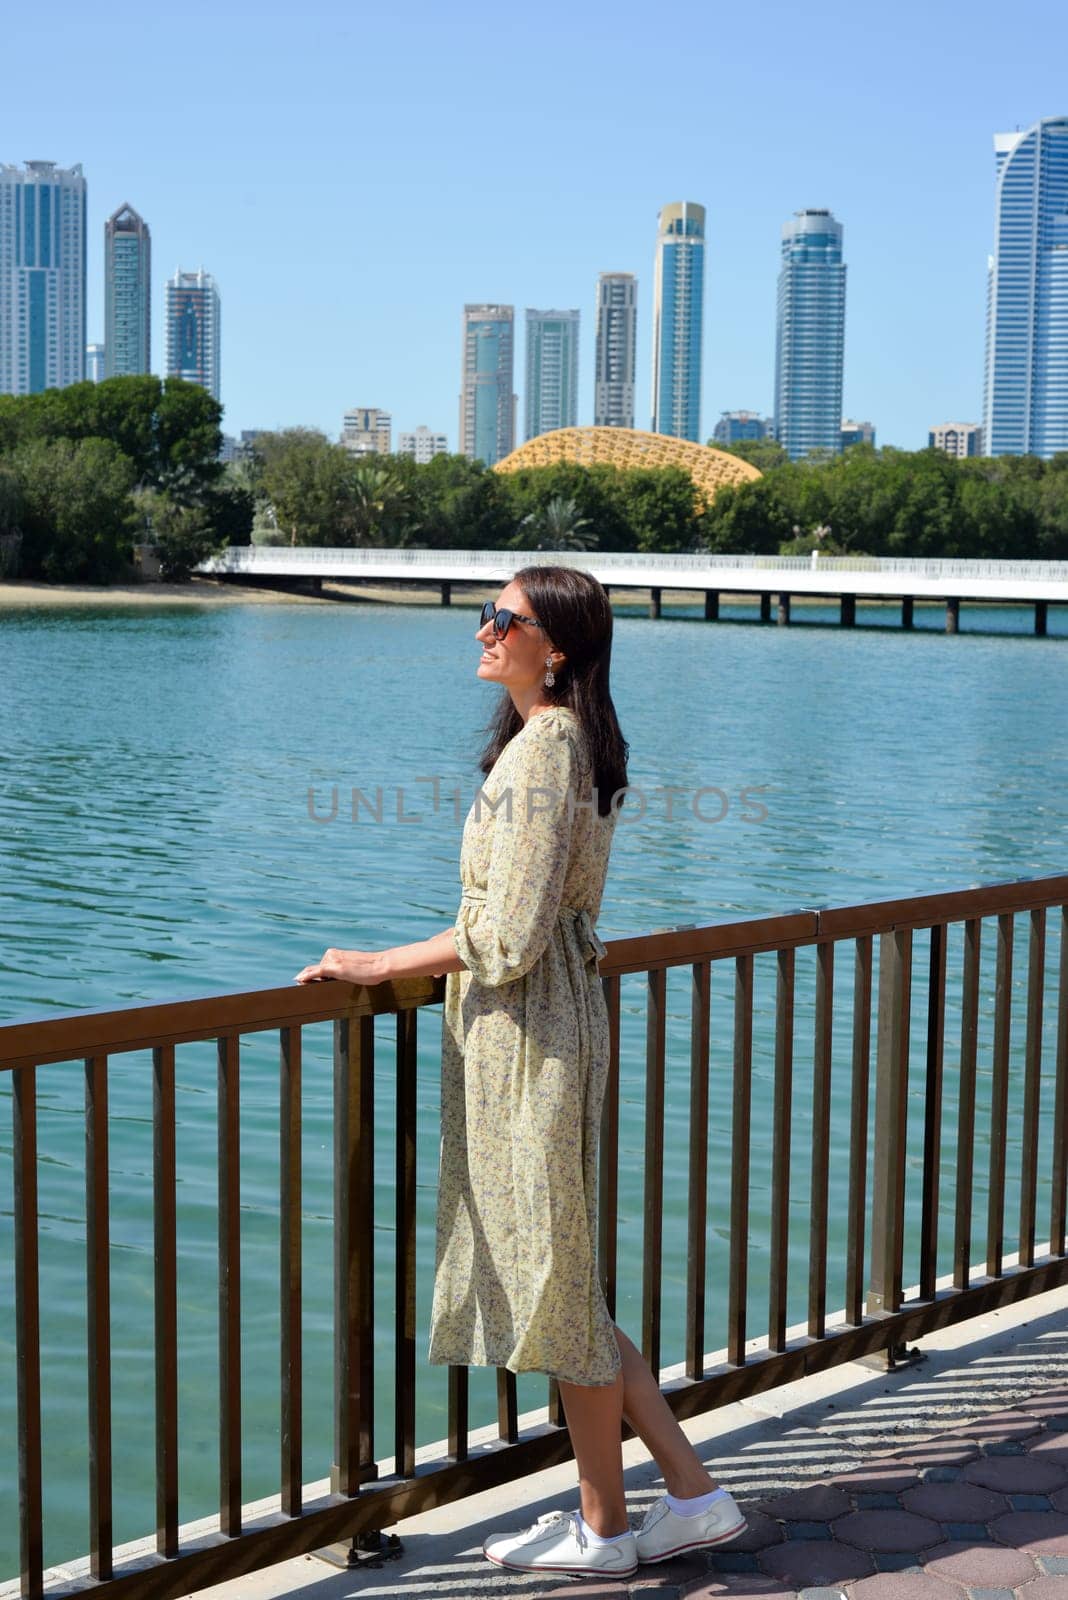 Cityscape of Sharjah UAE. A young woman in a long dress enjoys the view of skyscrapers and relaxing